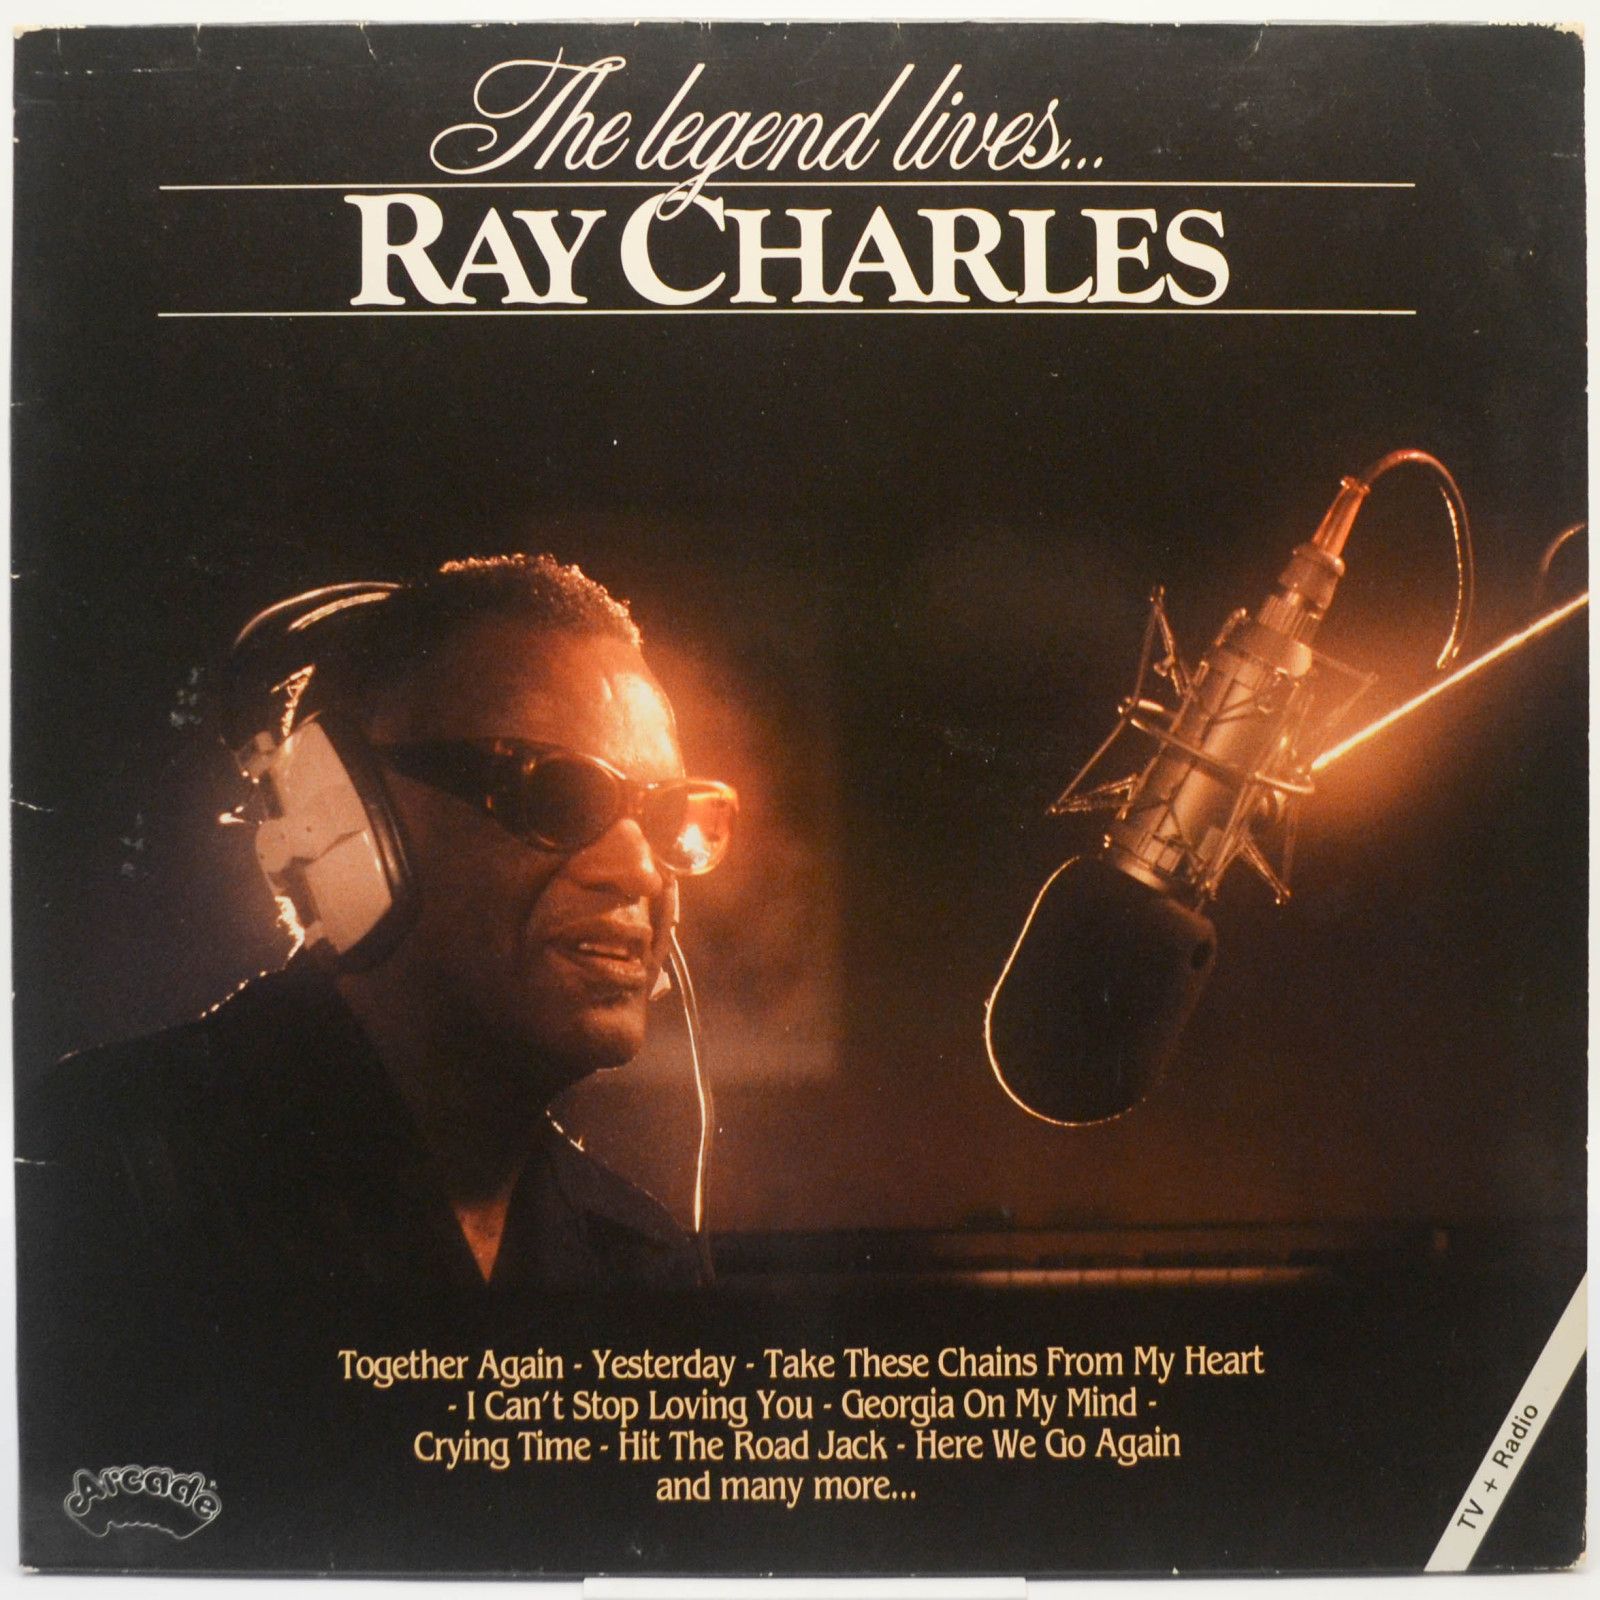 Ray Charles — The Legend Lives..., 1981